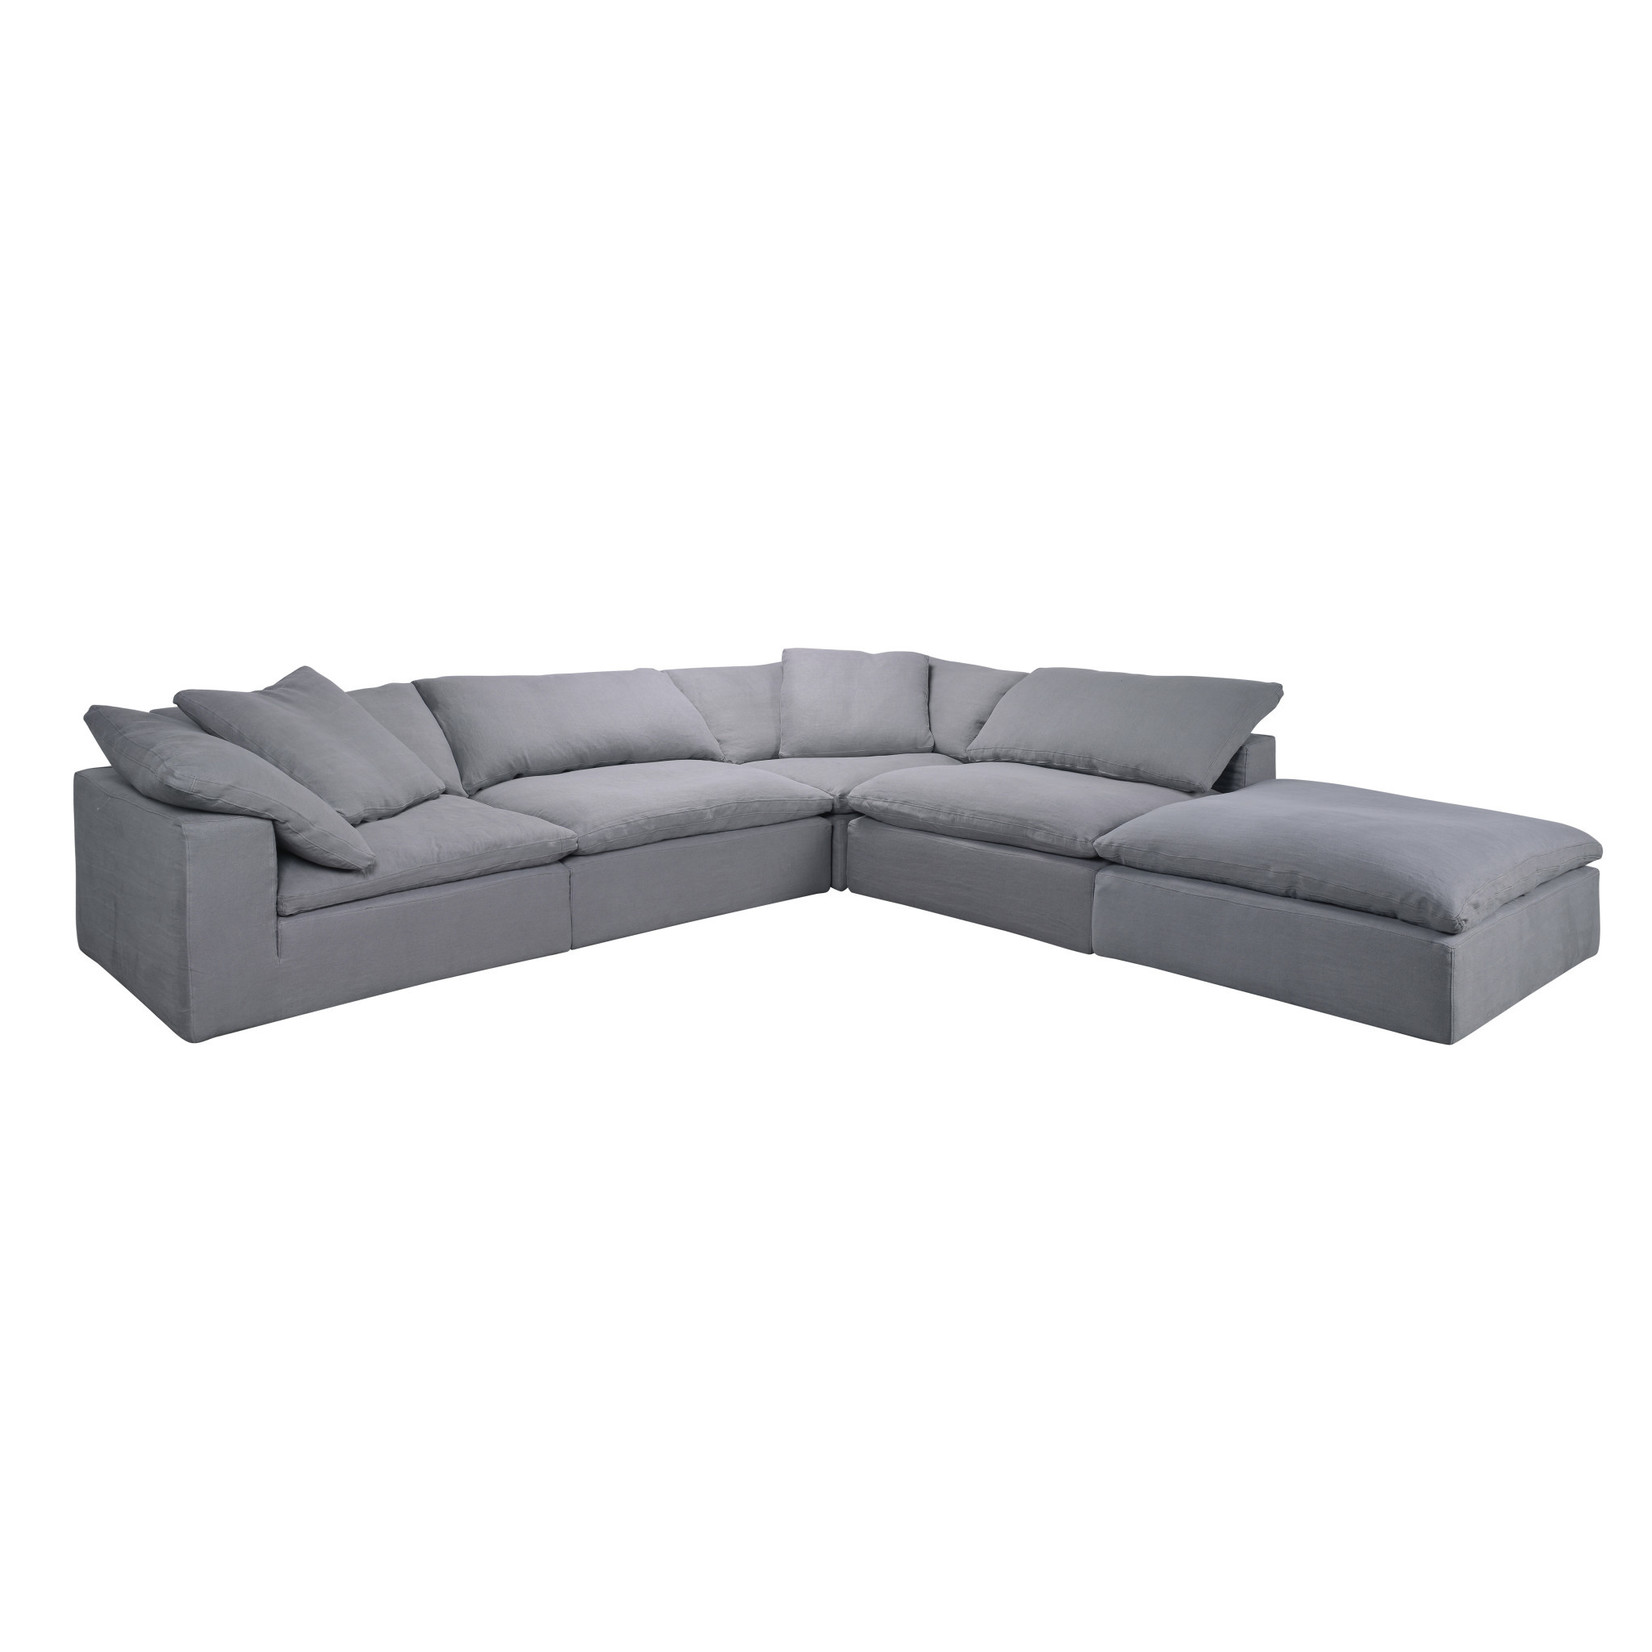 TIMOTHY OULTON SECTIONAL CLOUD SMALL  1 SEATER-GALATA LINEN GREY